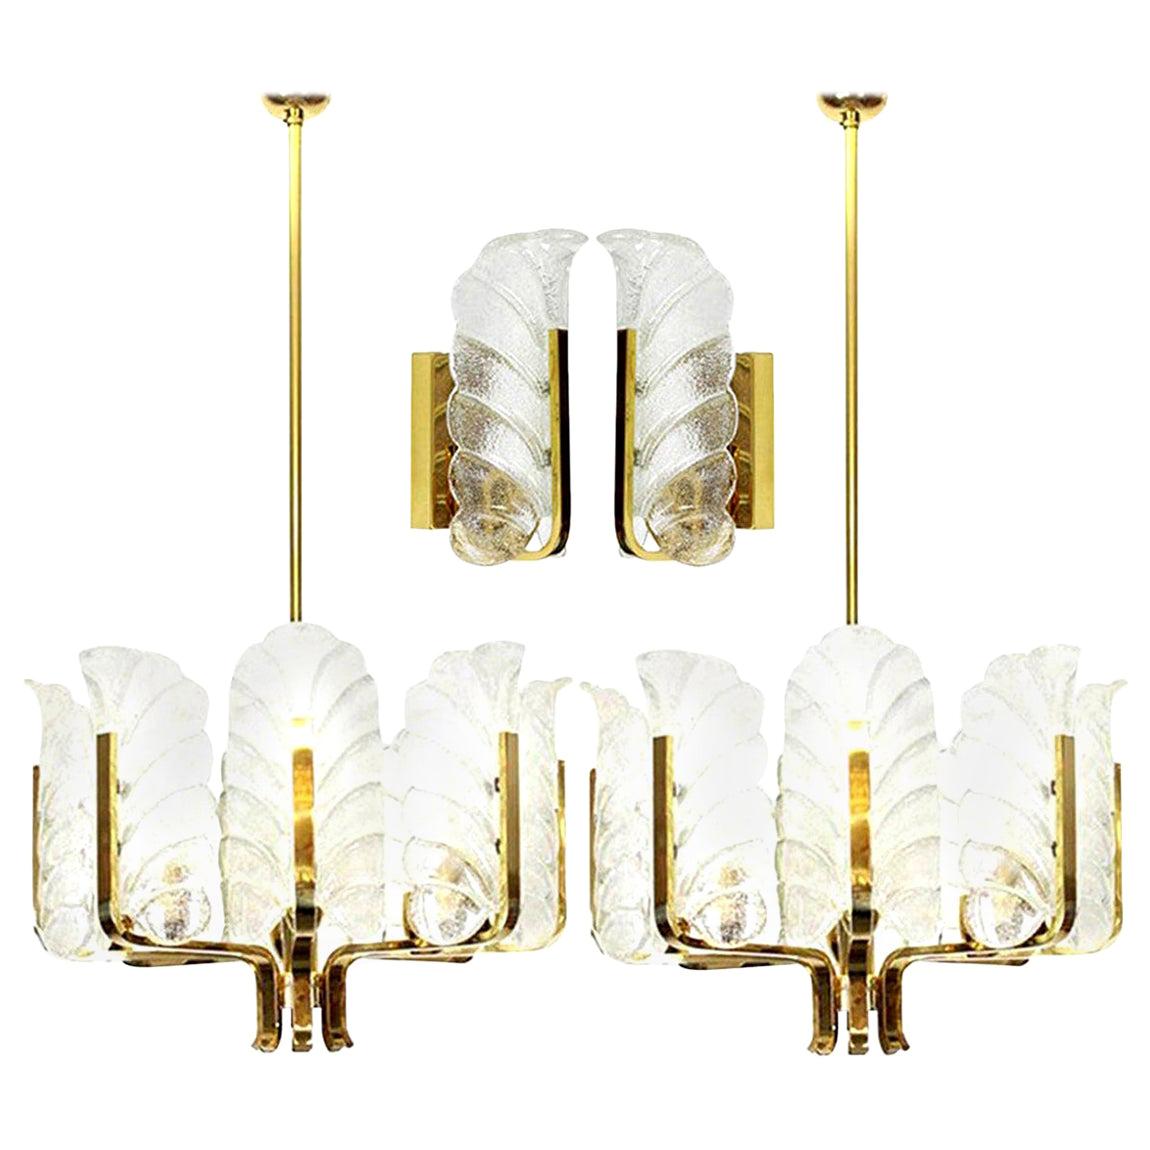 et of Four Leaves Brass Light Fixtures by Fagerlund for Orrefors, 1960s, Sweden For Sale